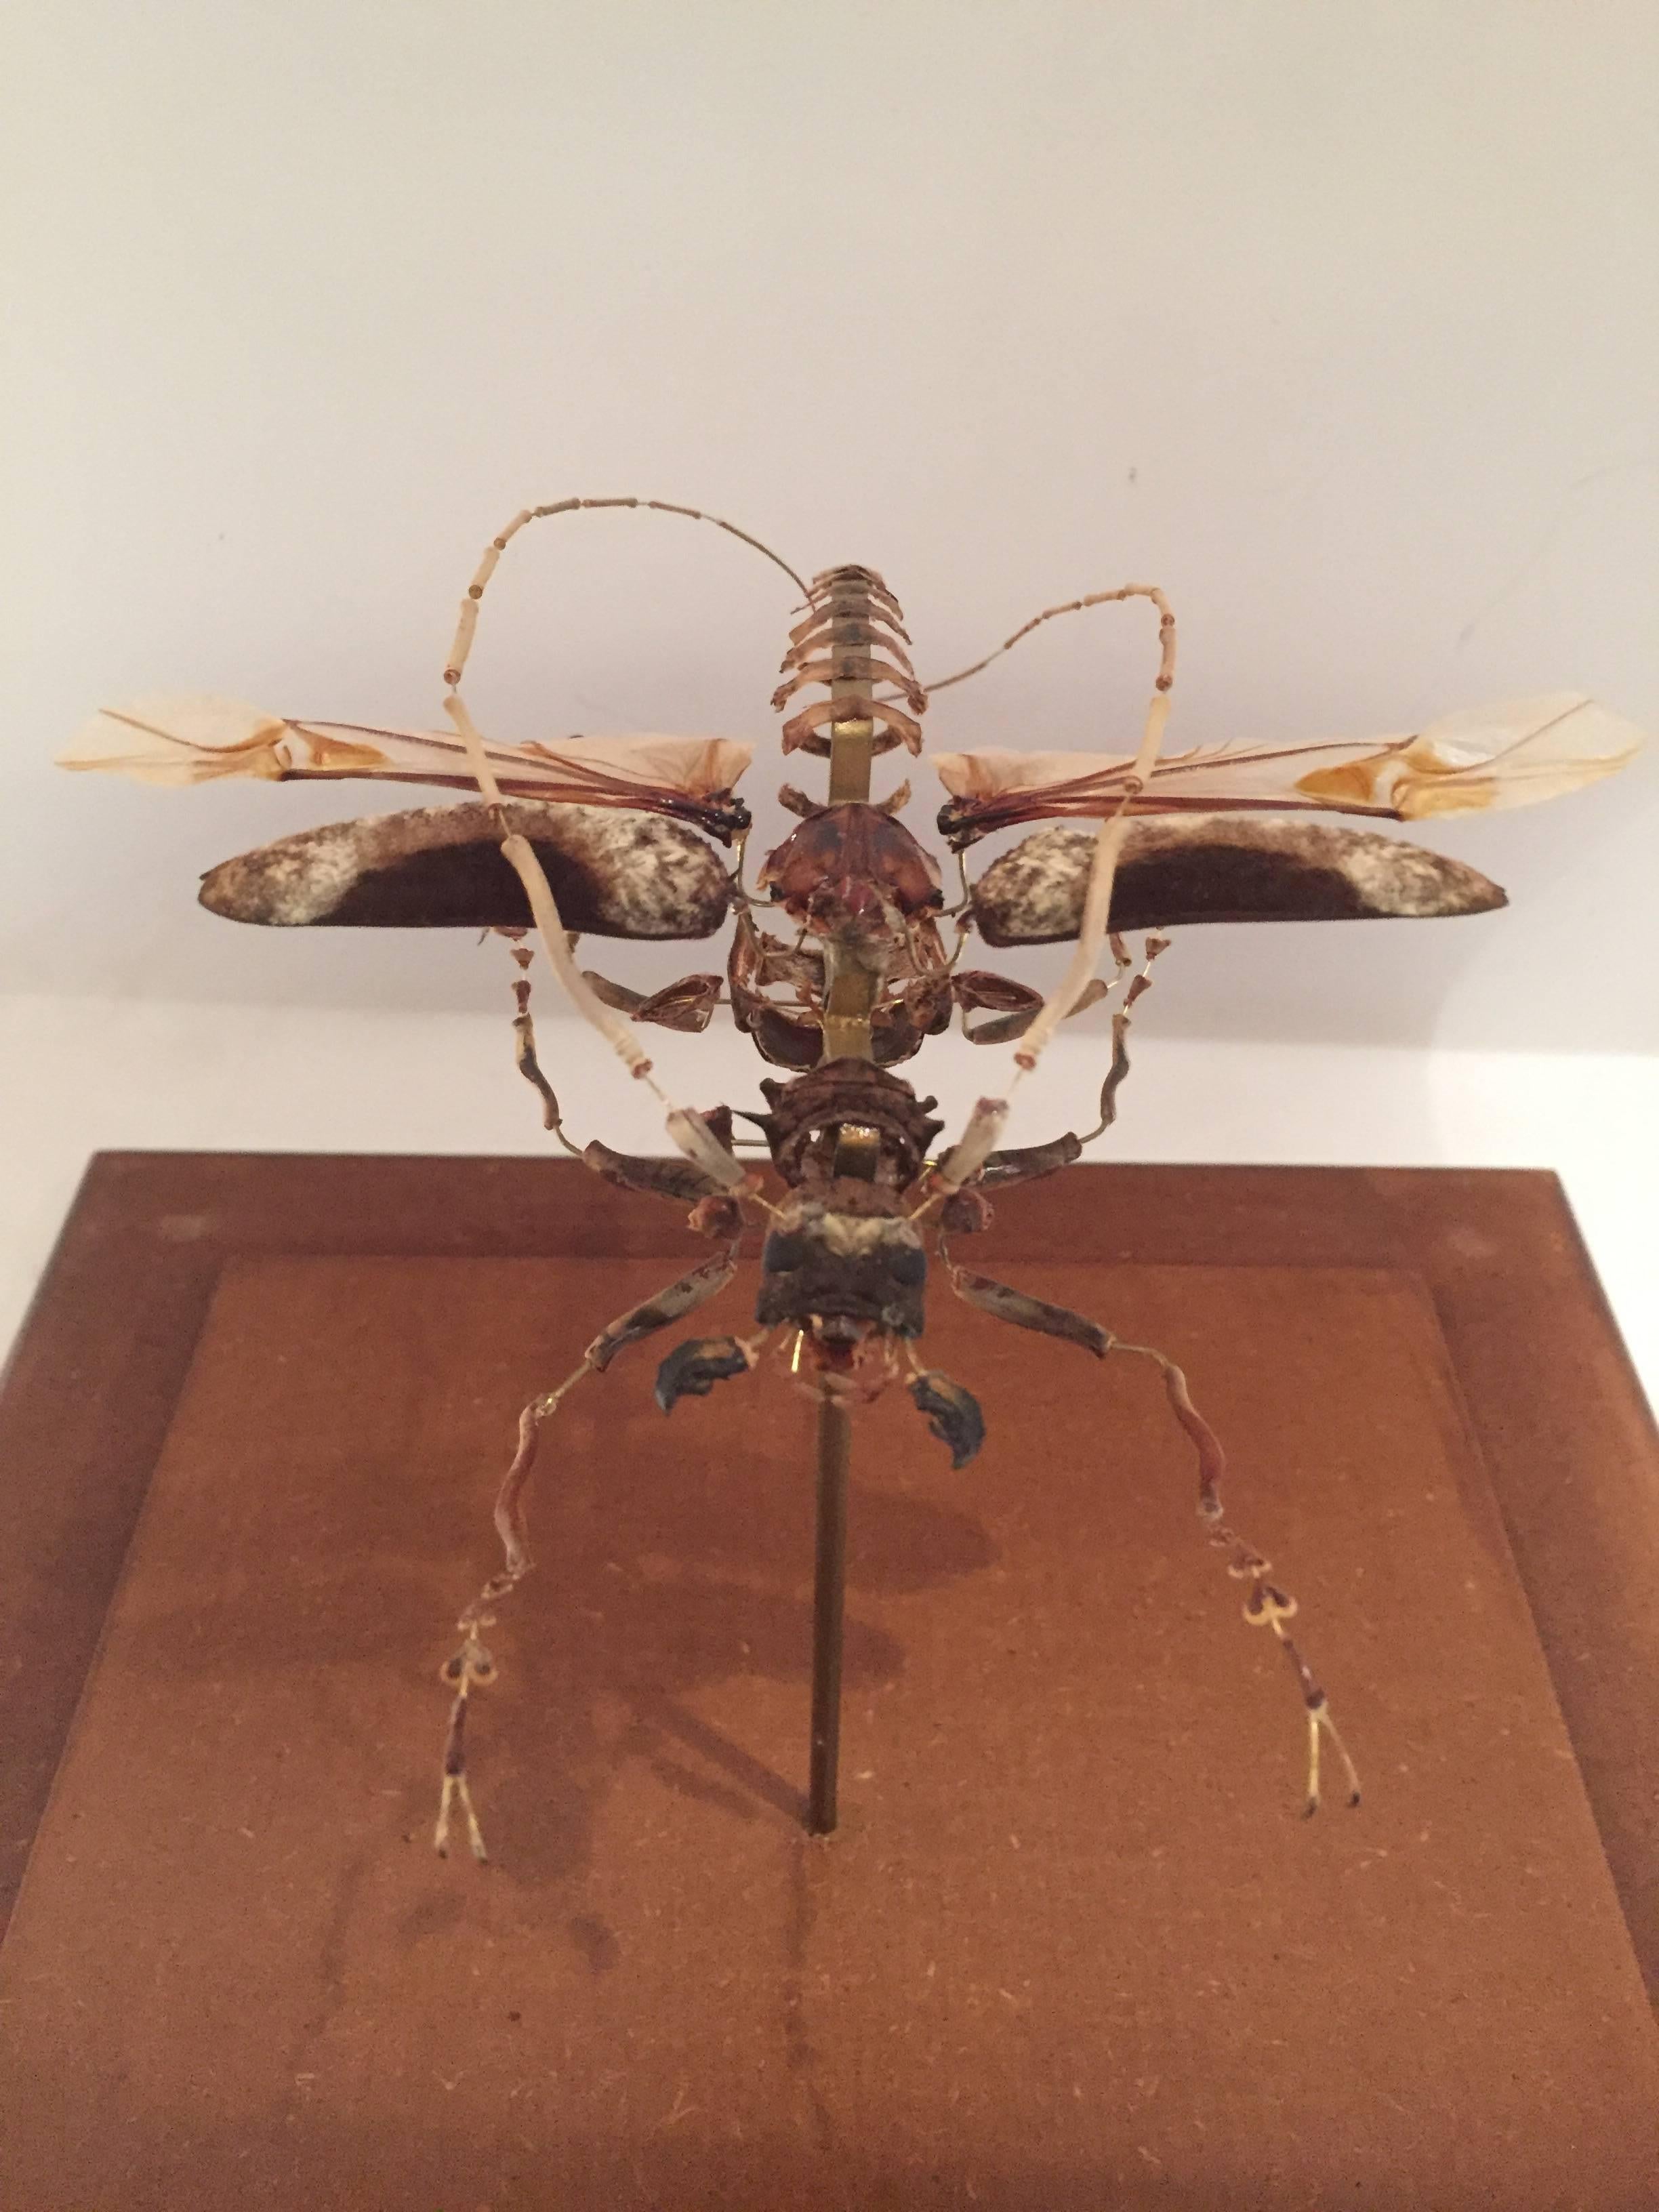 A Giant Longhorn beetle specimen (petrognatha gigas) has been deconstructed and mounted under a metal and glass display case 12